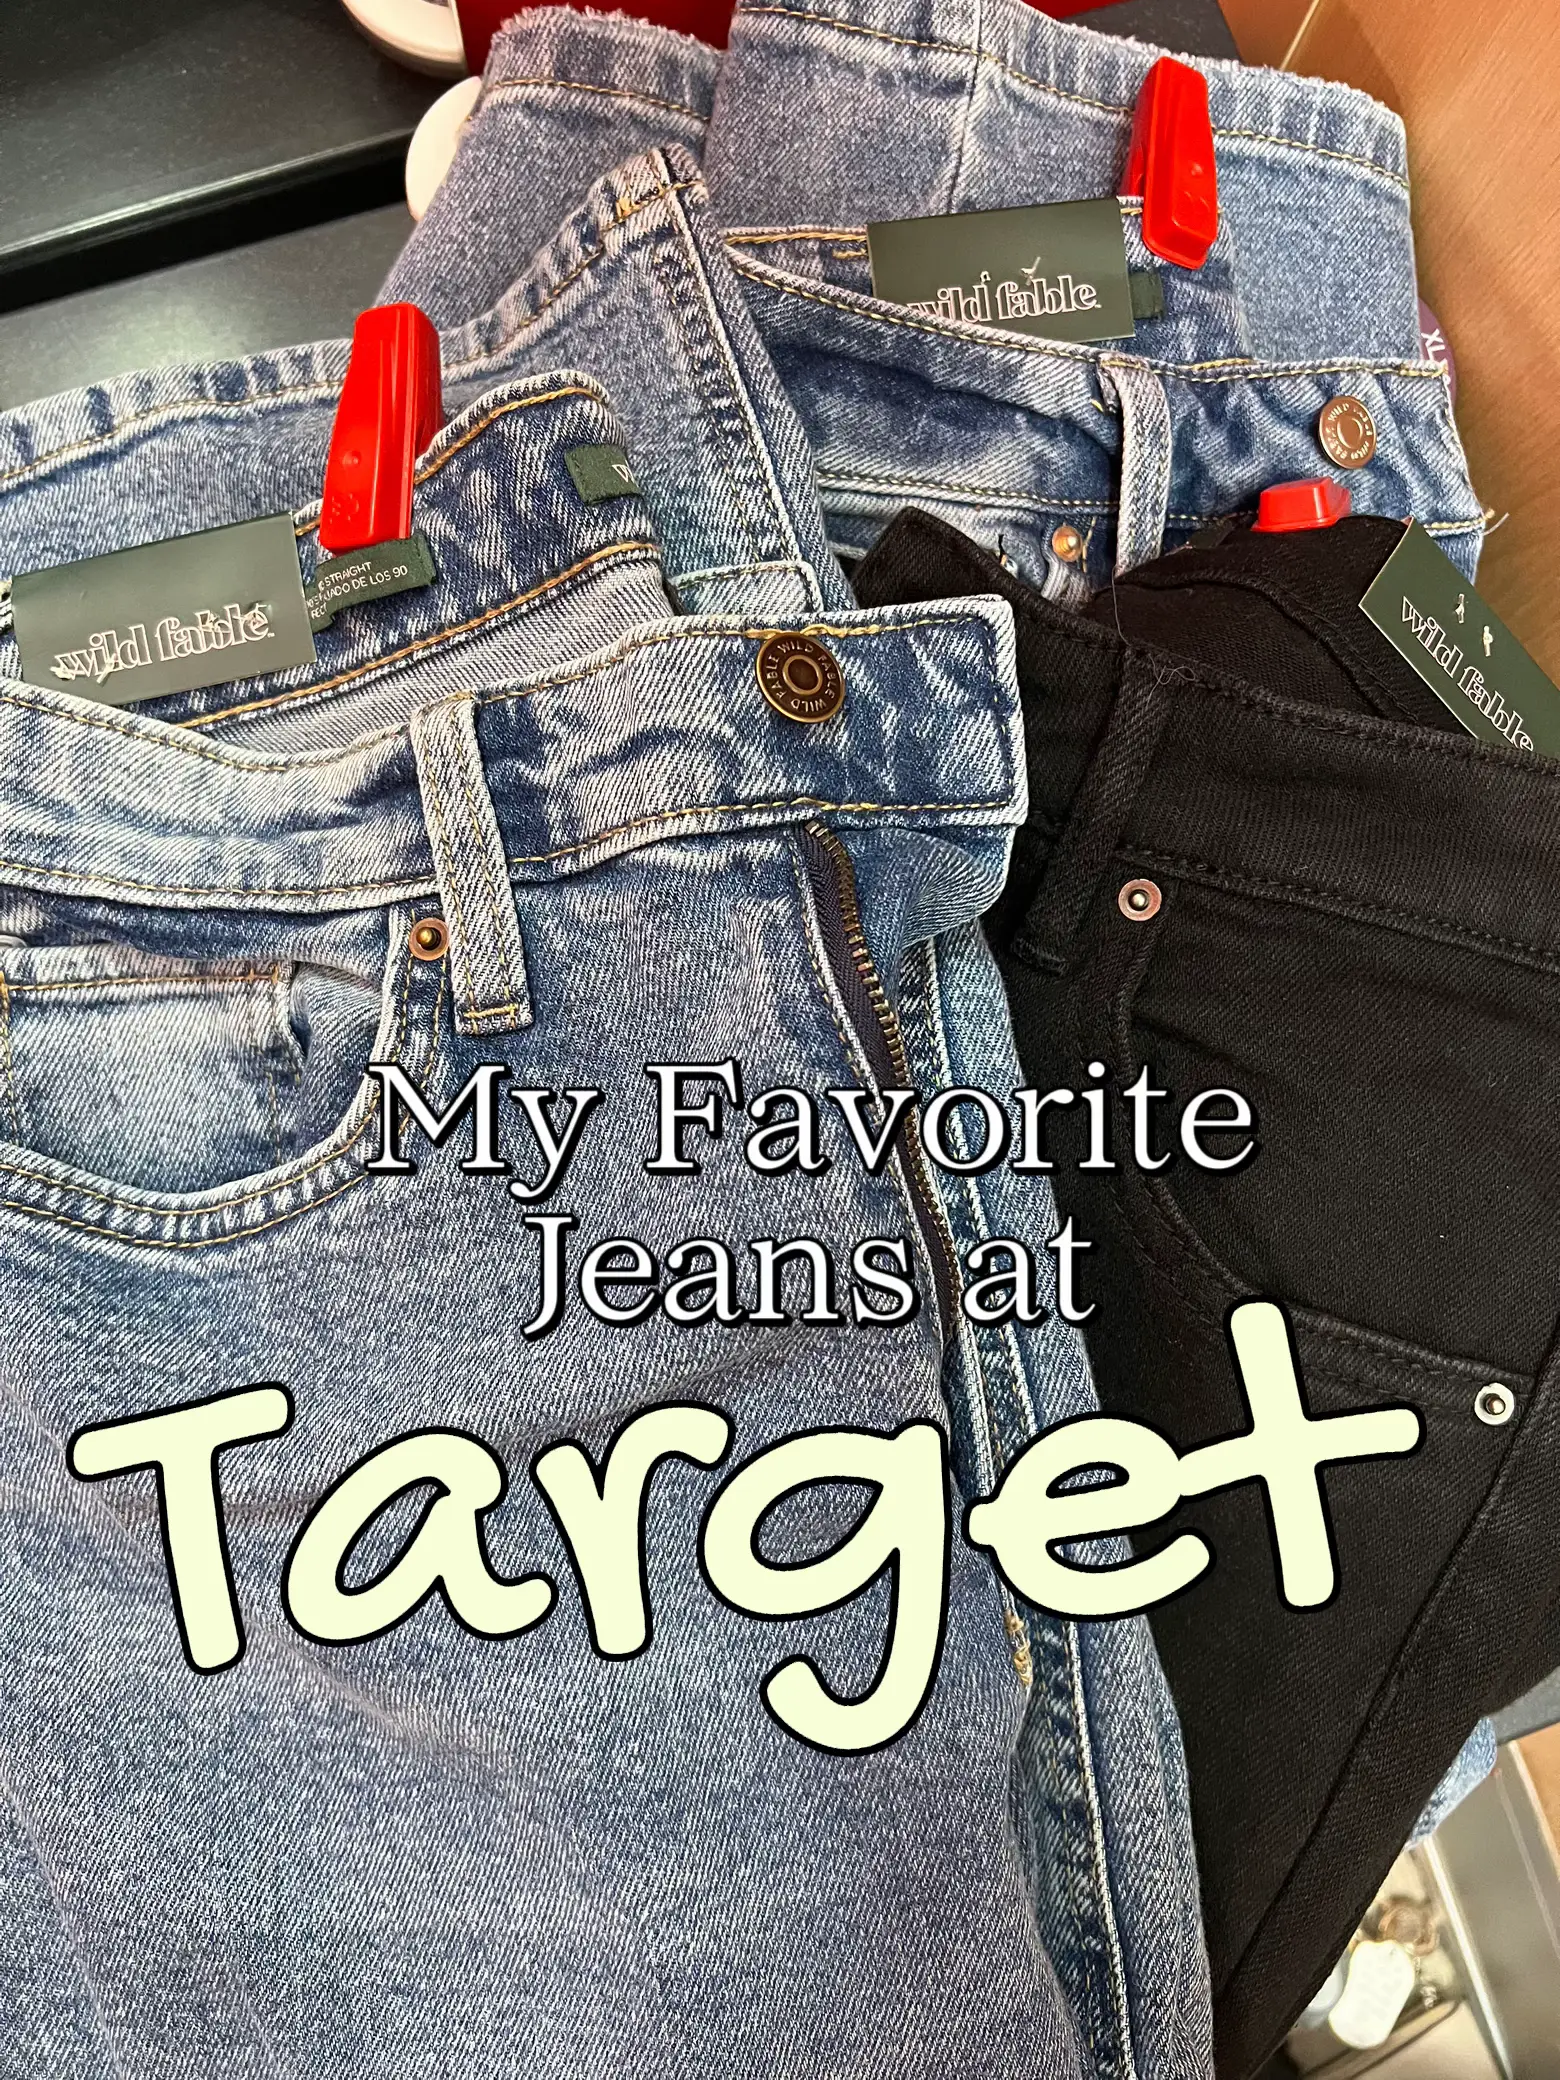 target wild fable french terry sweatpants｜TikTok Search